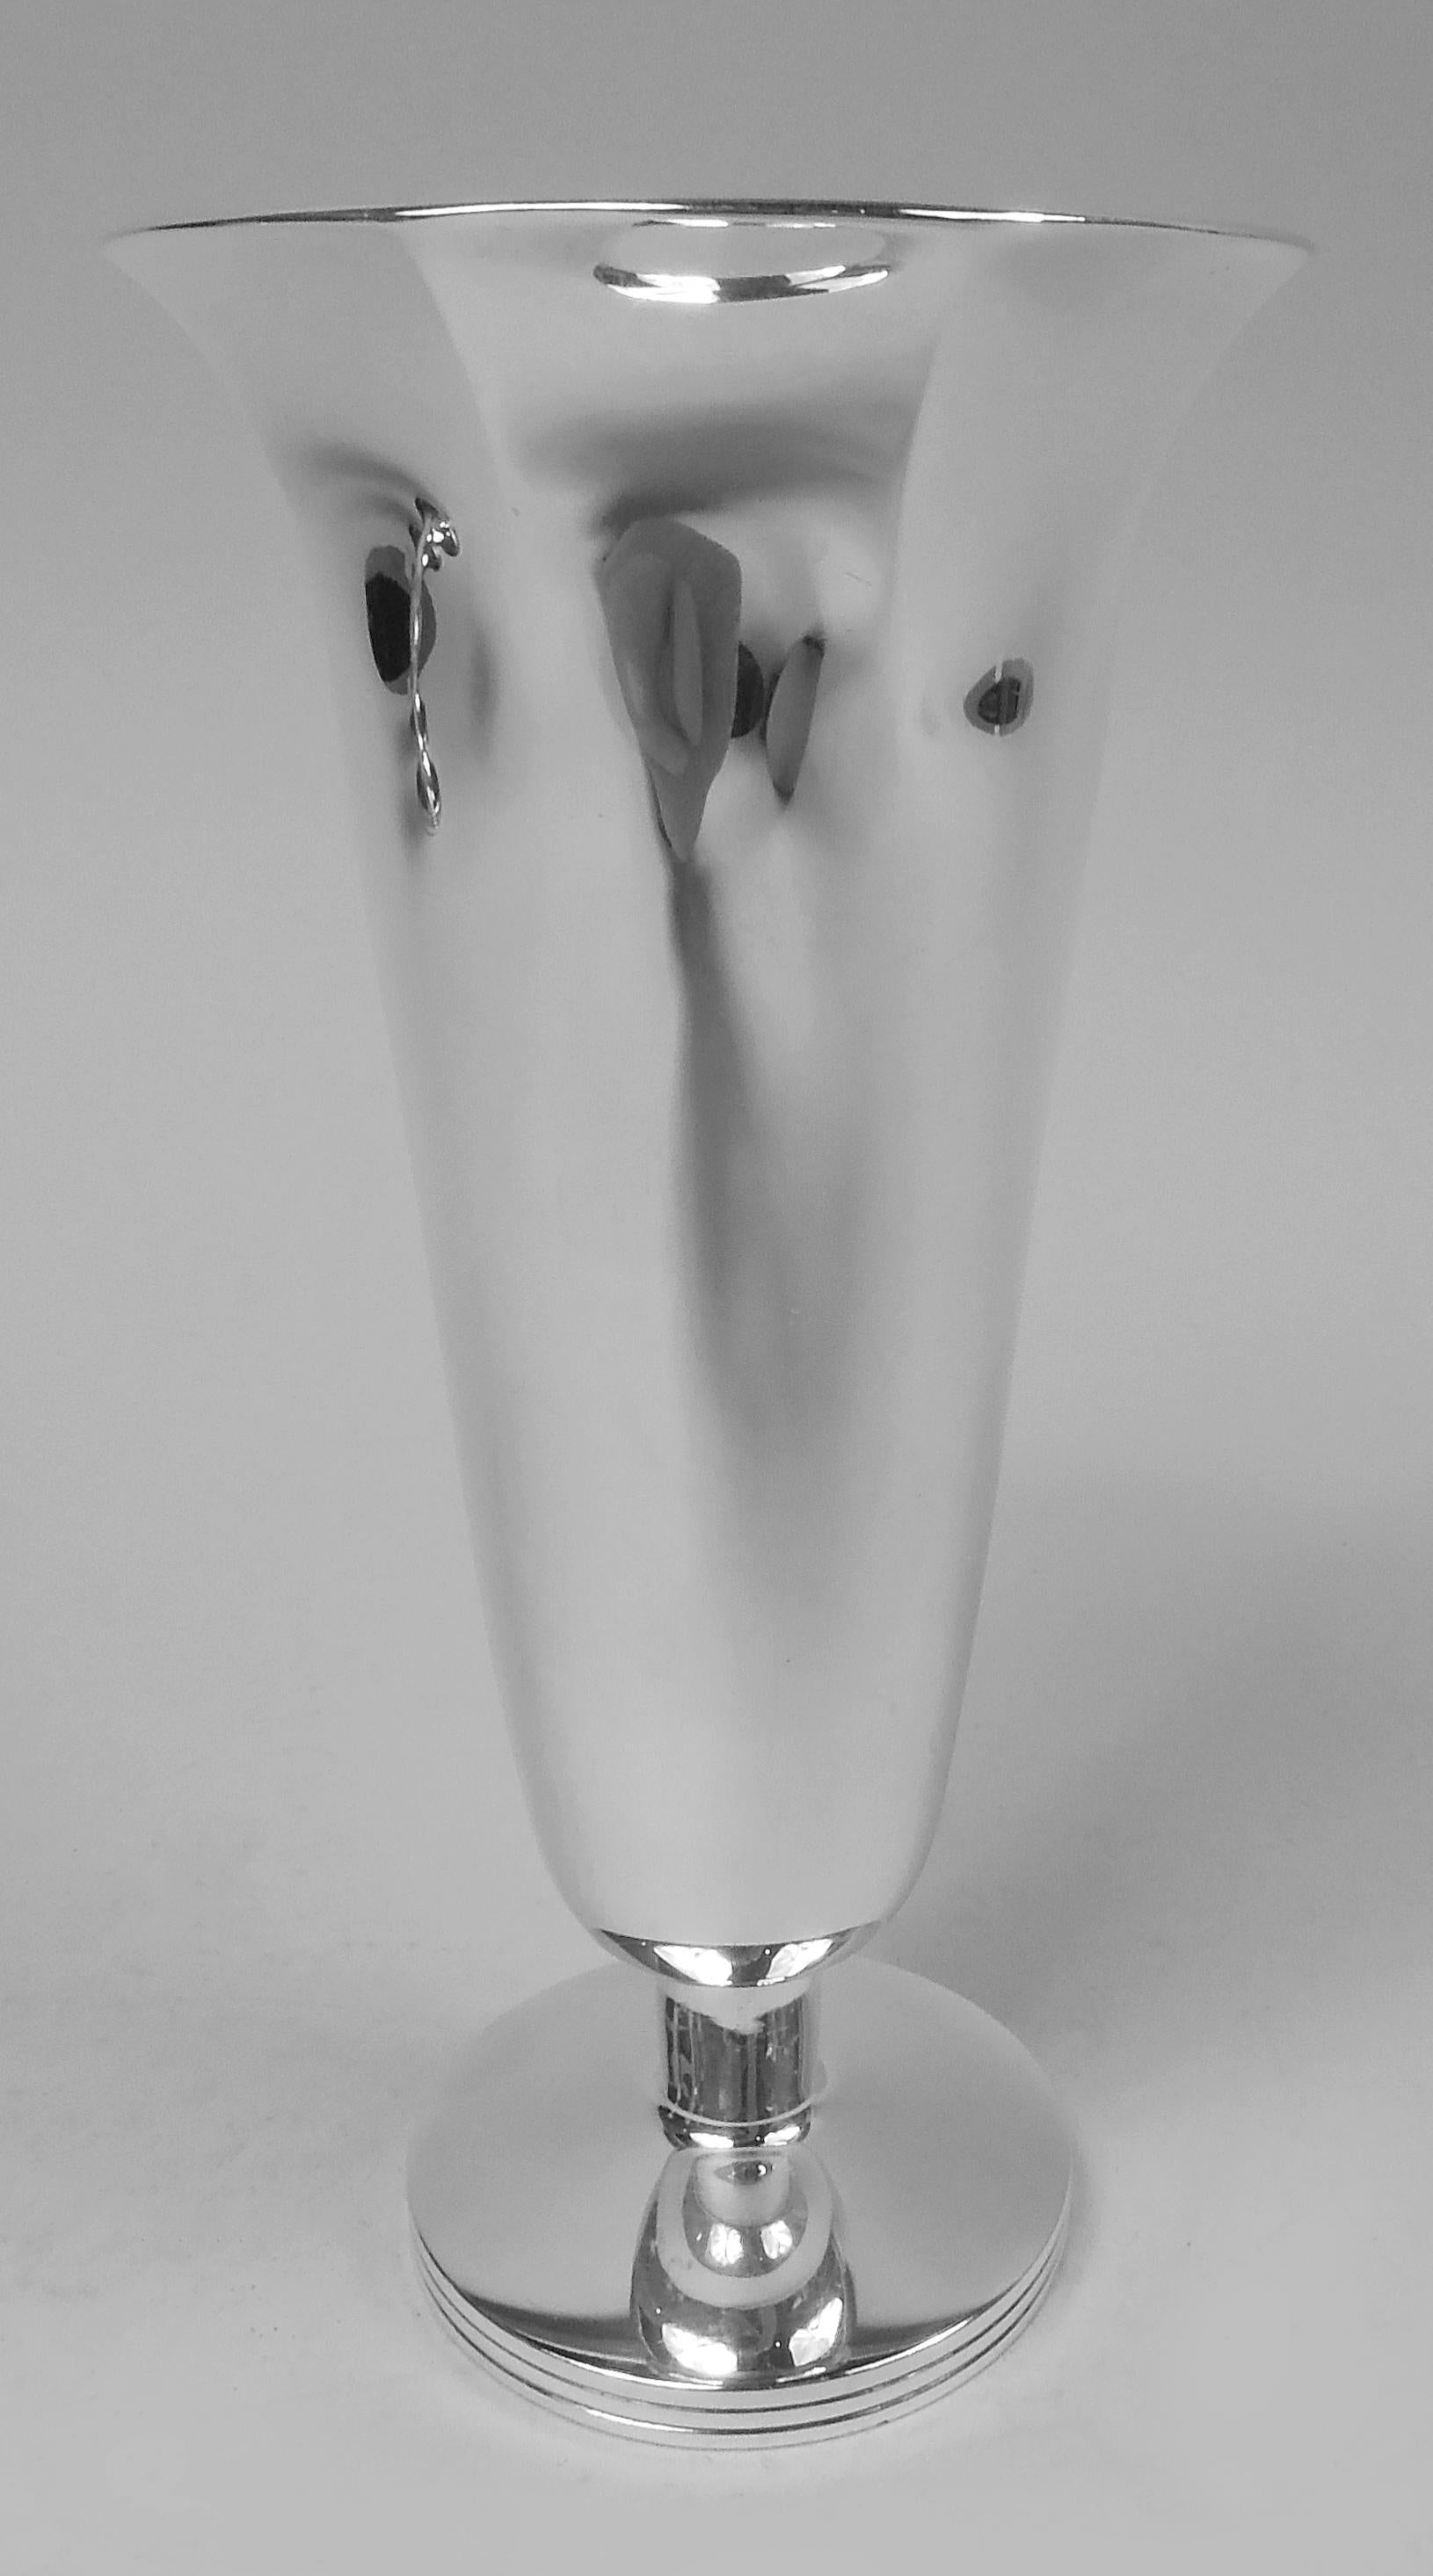 Modern Classical sterling silver vase. Made by Sotirio Bulgari in London in 1989 Tapering bowl with faceted and flared rim and gilt interior; short cylindrical stem and round foot with reeded rim. Fully marked including maker’s and retailer’s